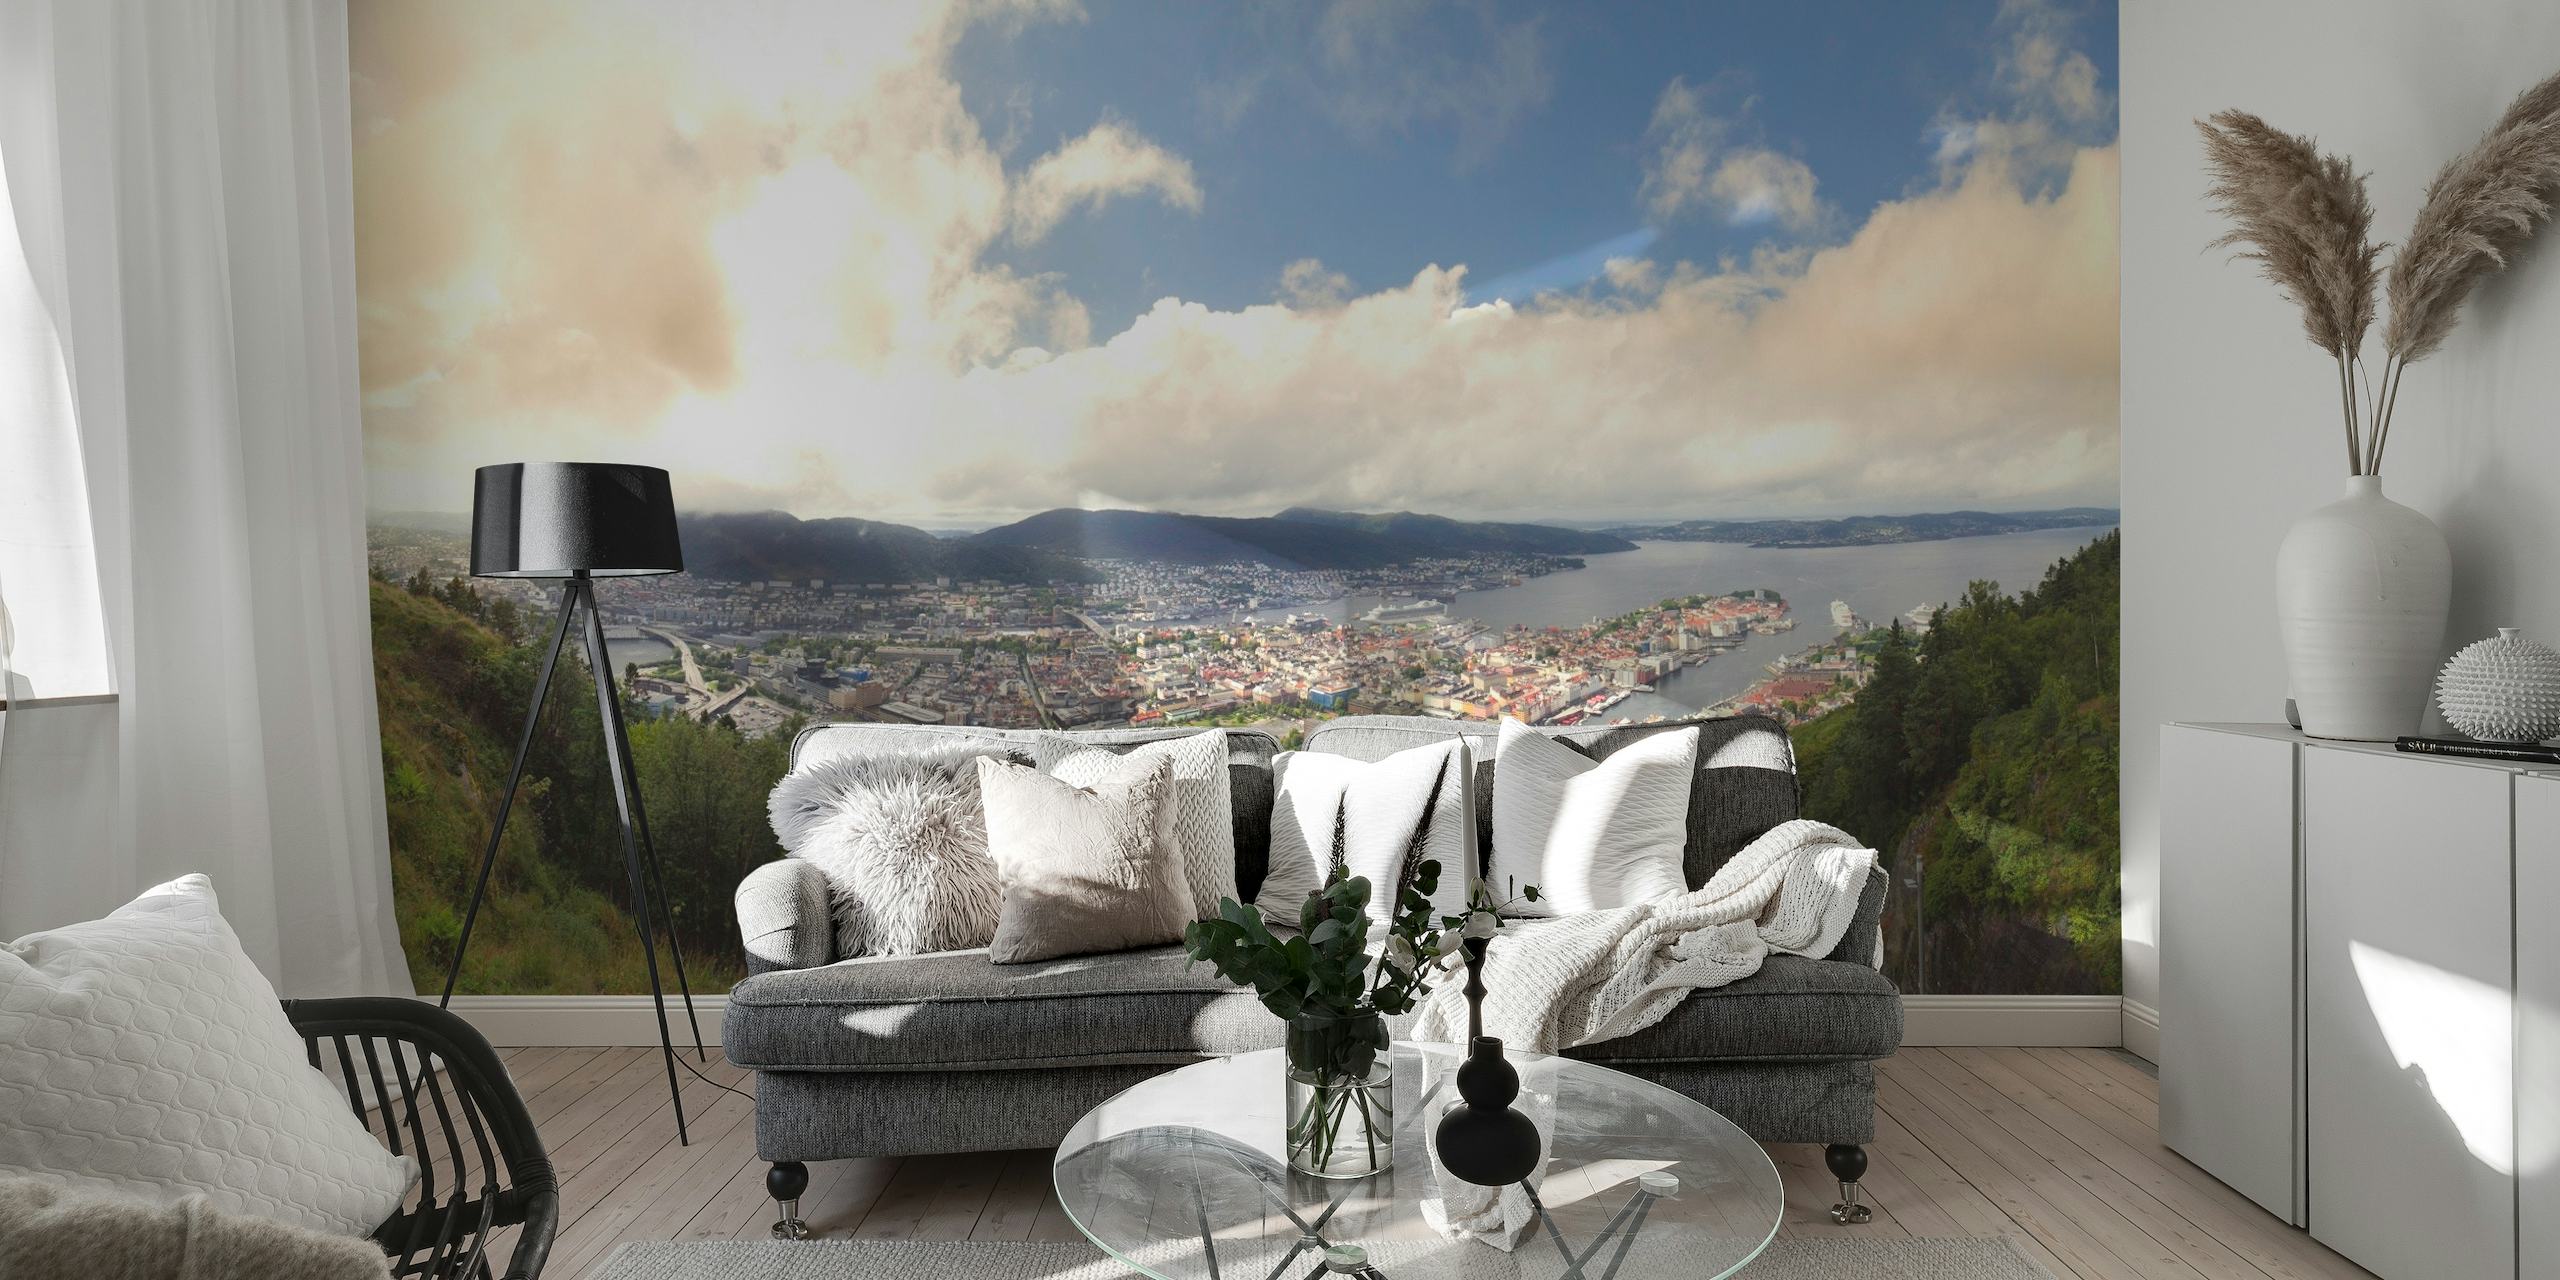 Panoramic view wall mural of Bergen city surrounded by mountains and greenery